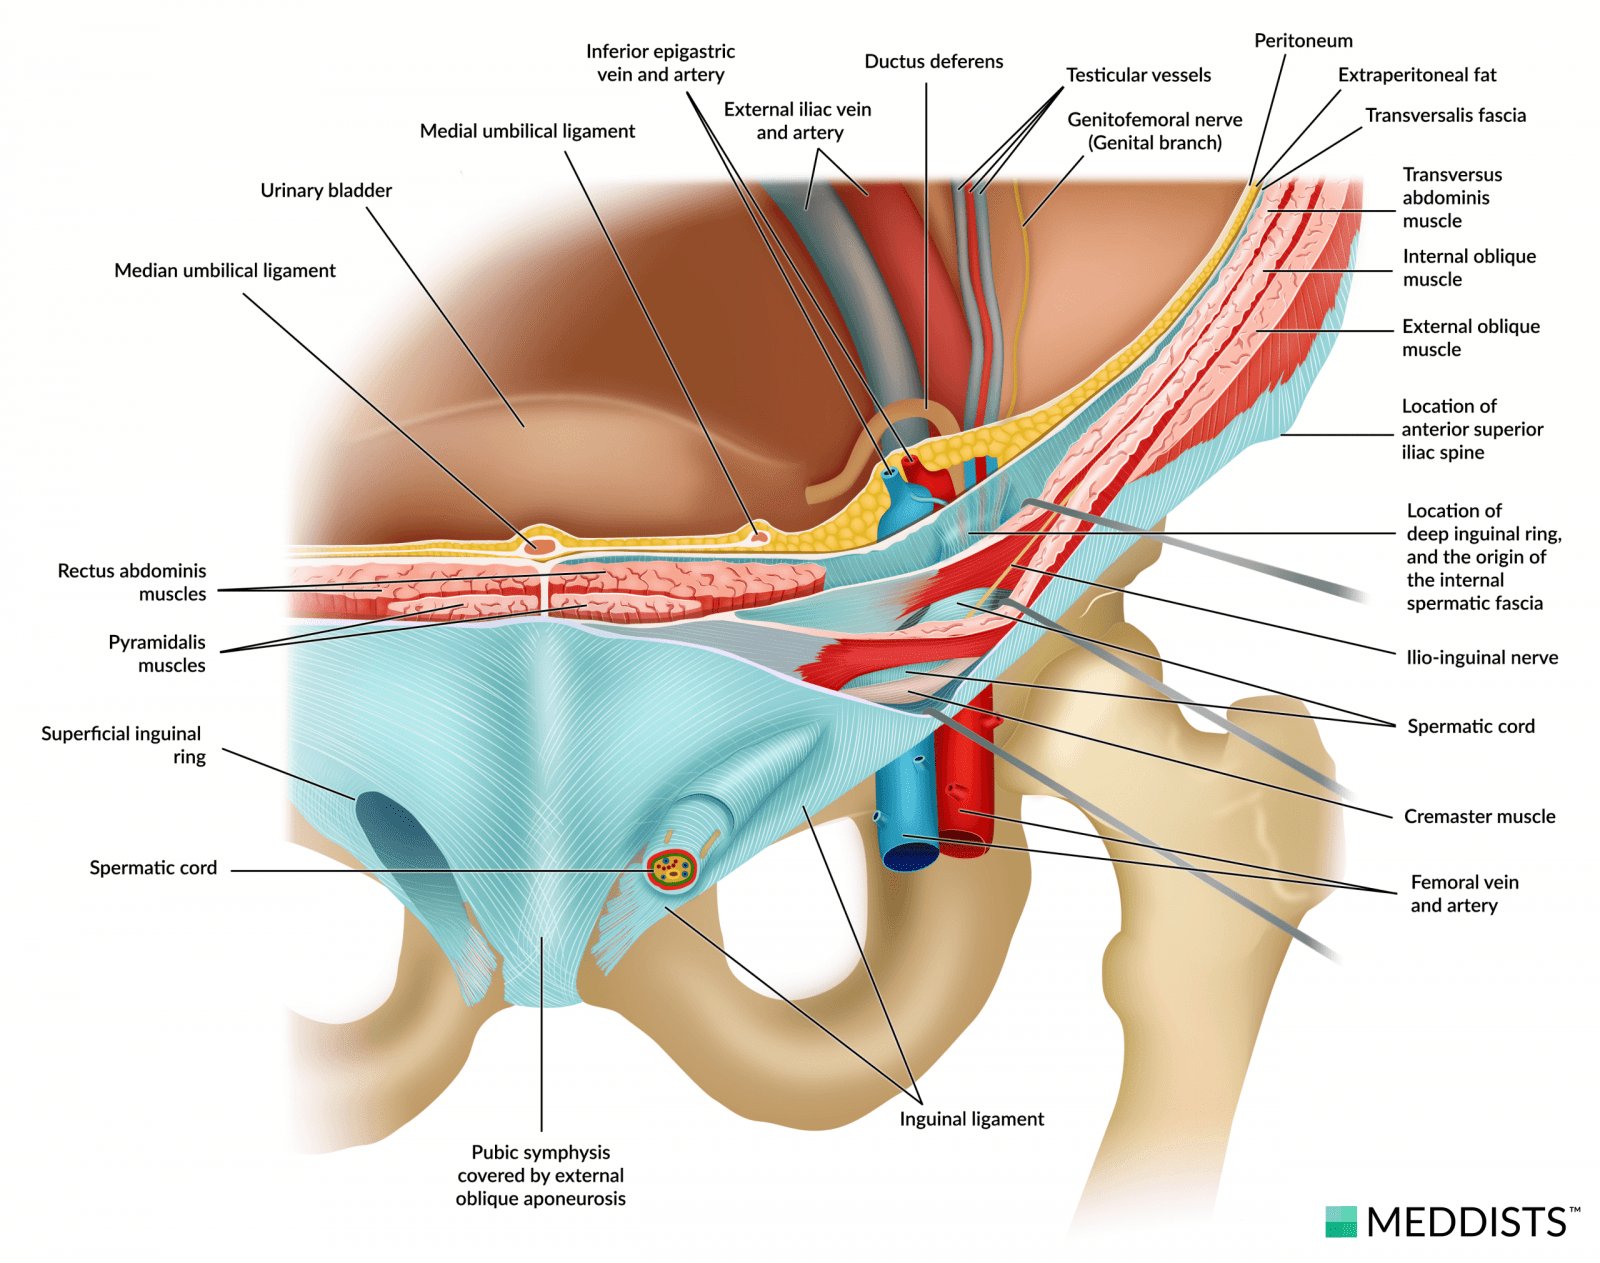 3D Tour of the Inguinal Canal 